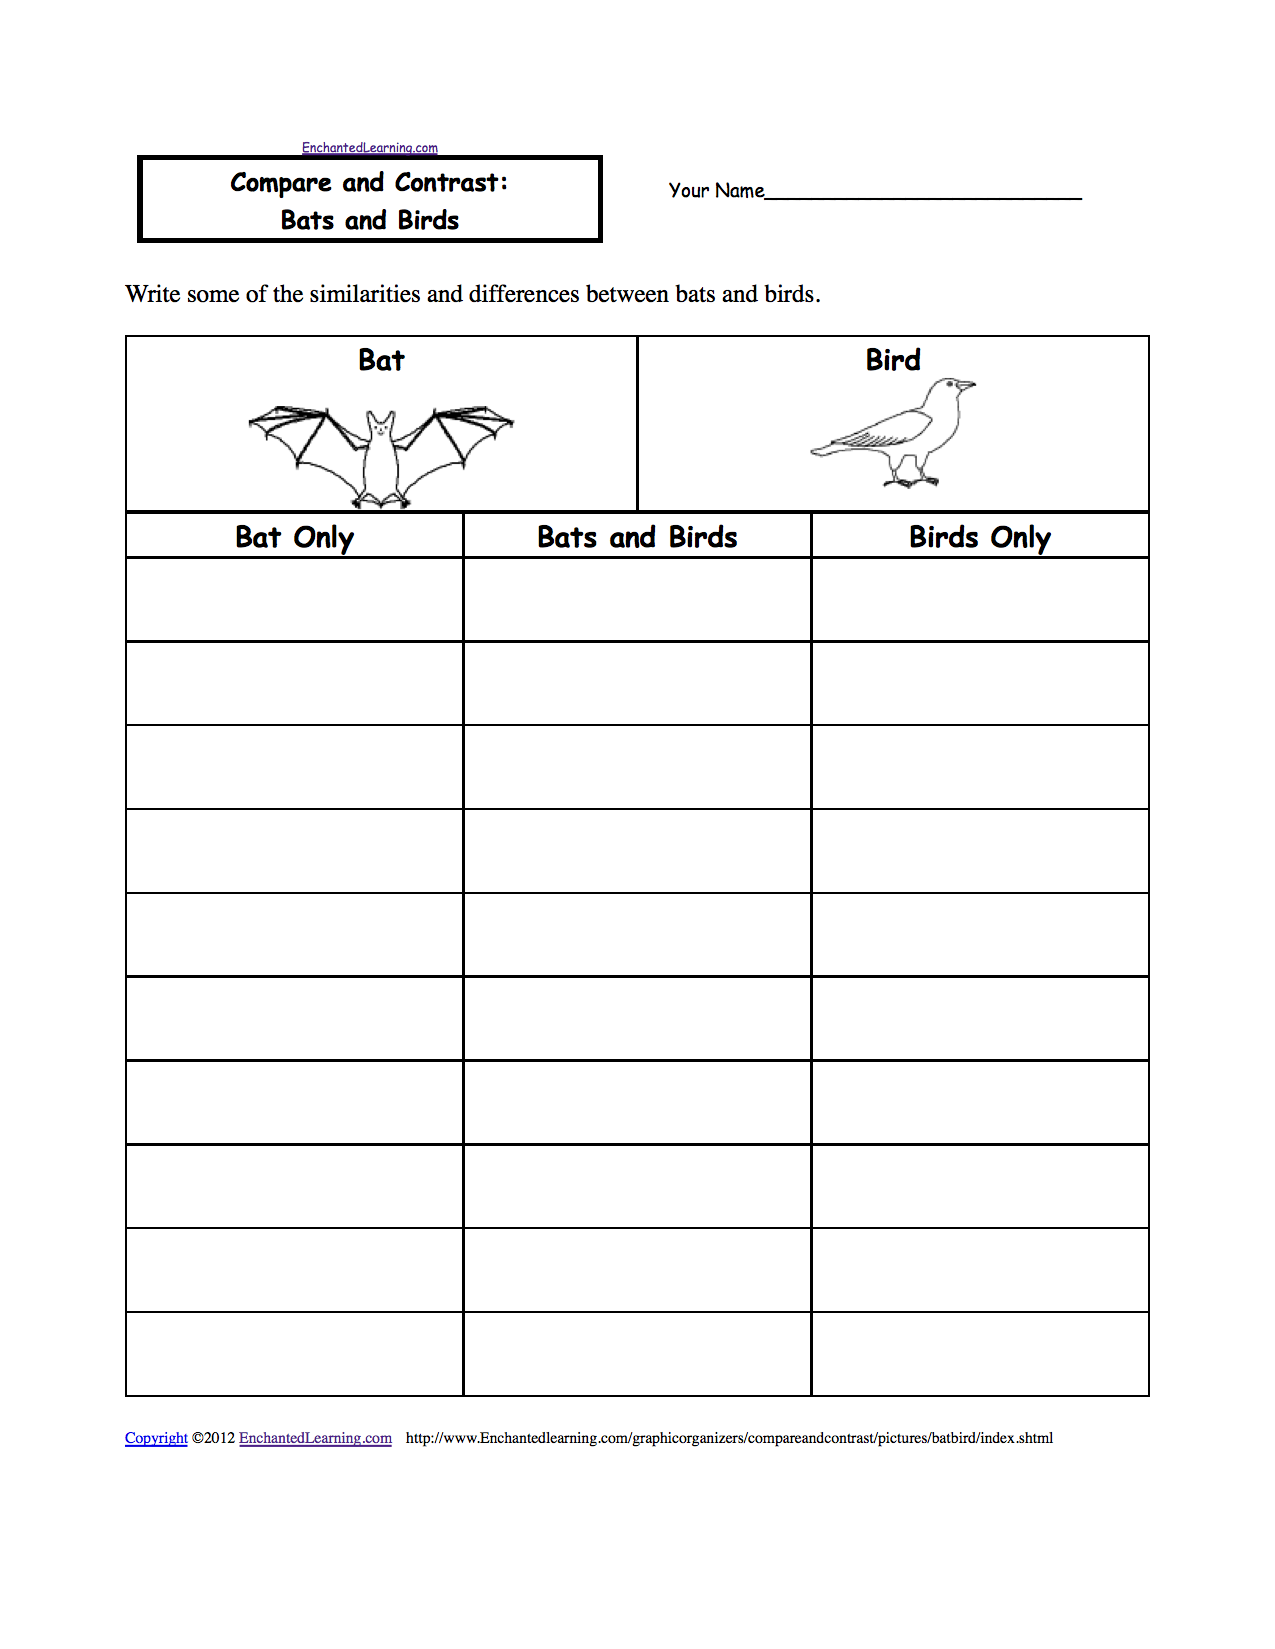 Compare and Contrast Worksheets Image